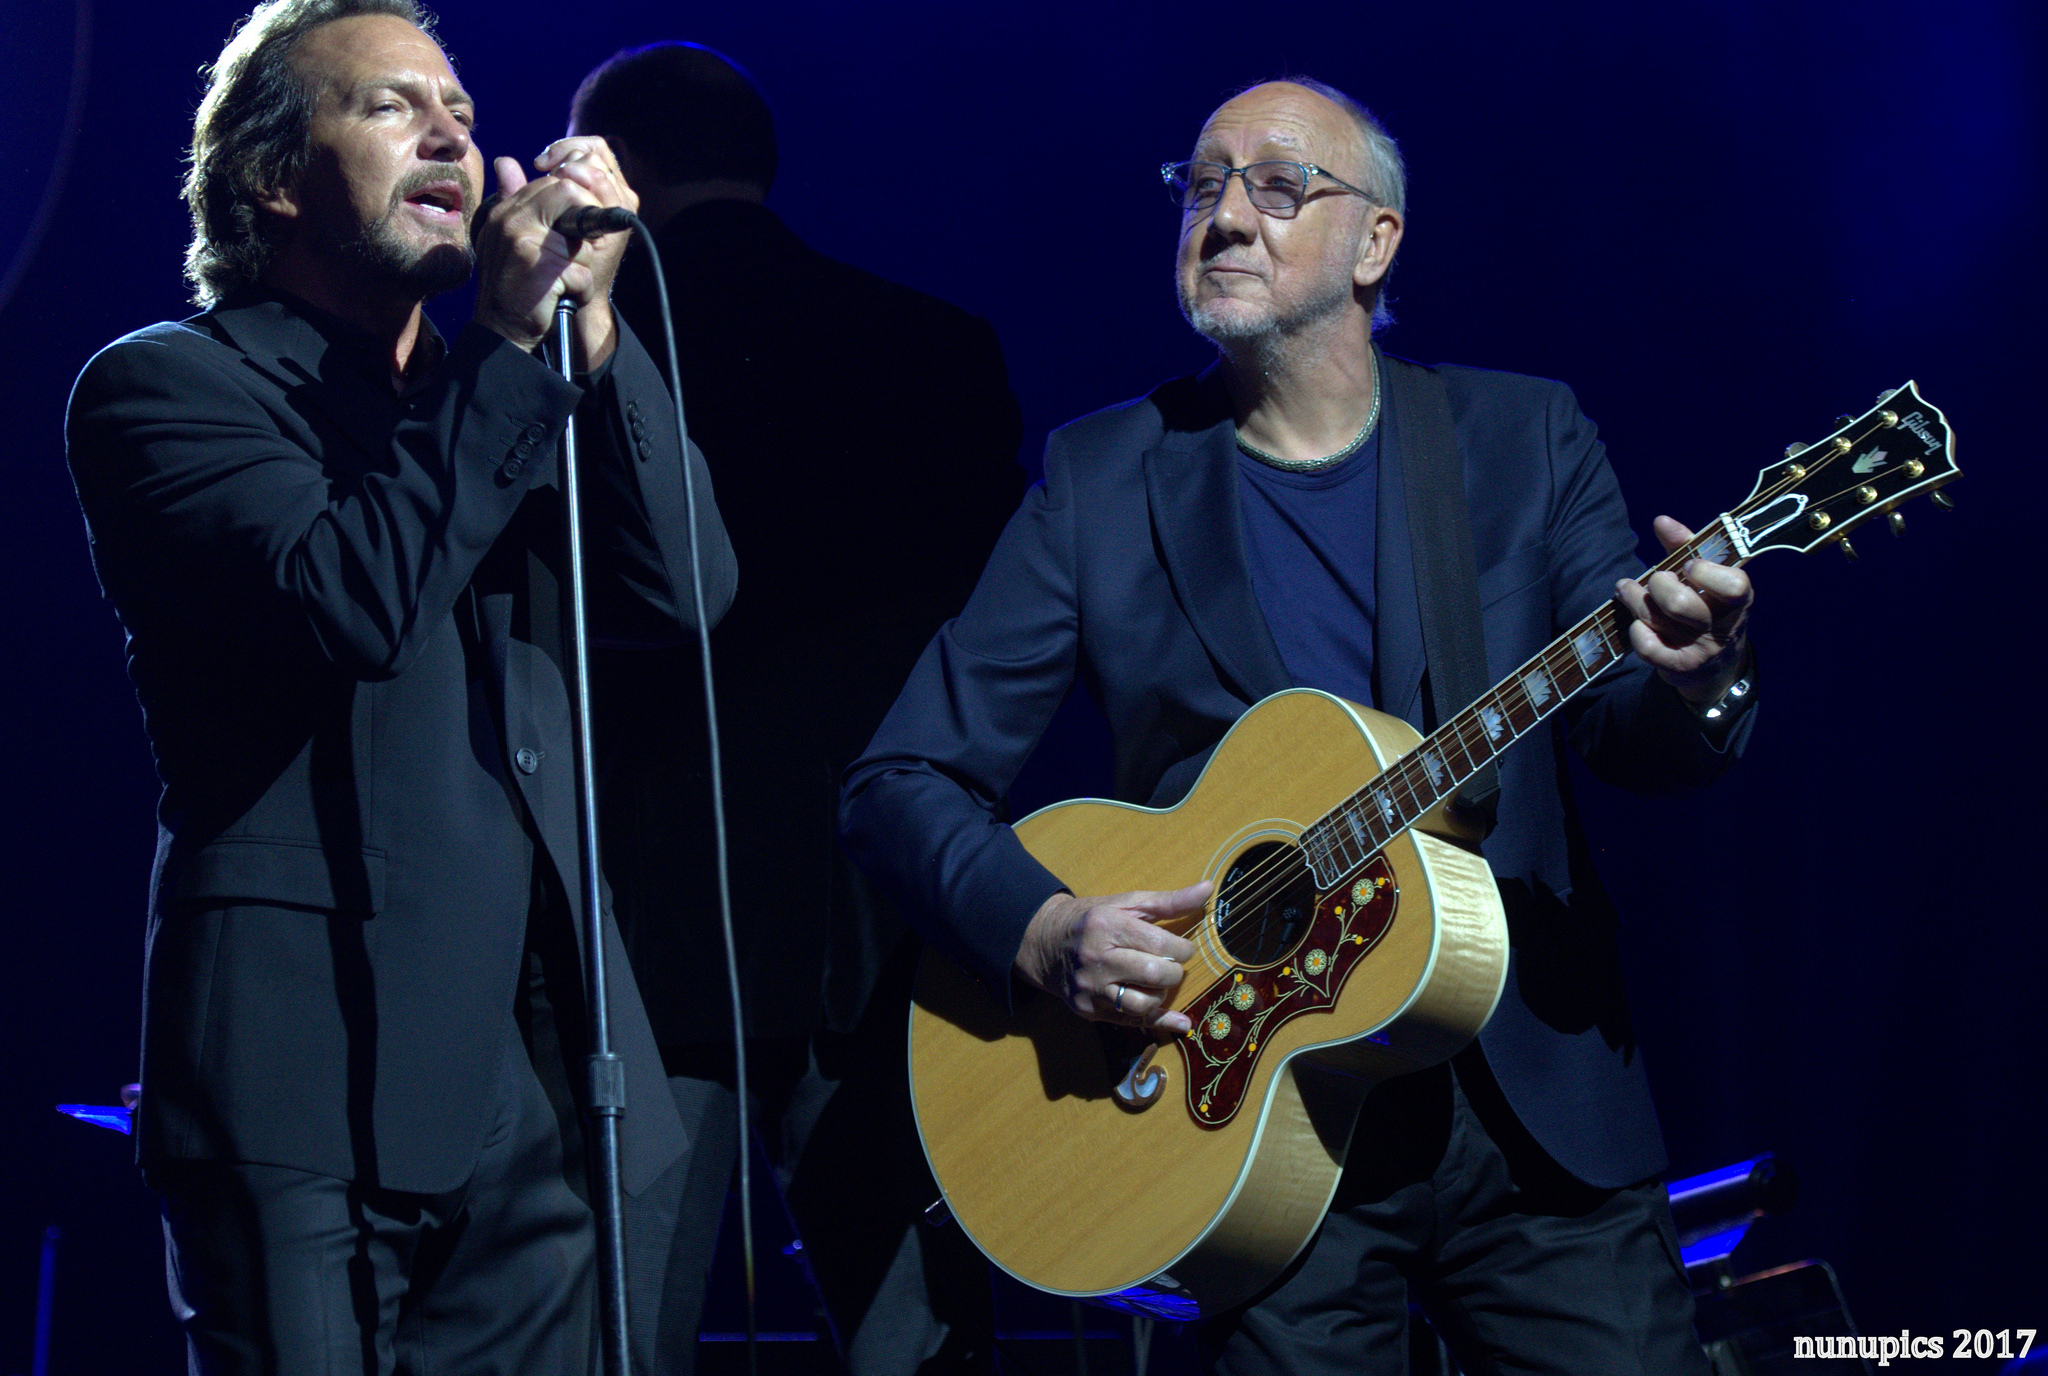 Pete & Eddie Toast 20 Year Friendship With Quadrophenia Spectacle [Photos / Video]